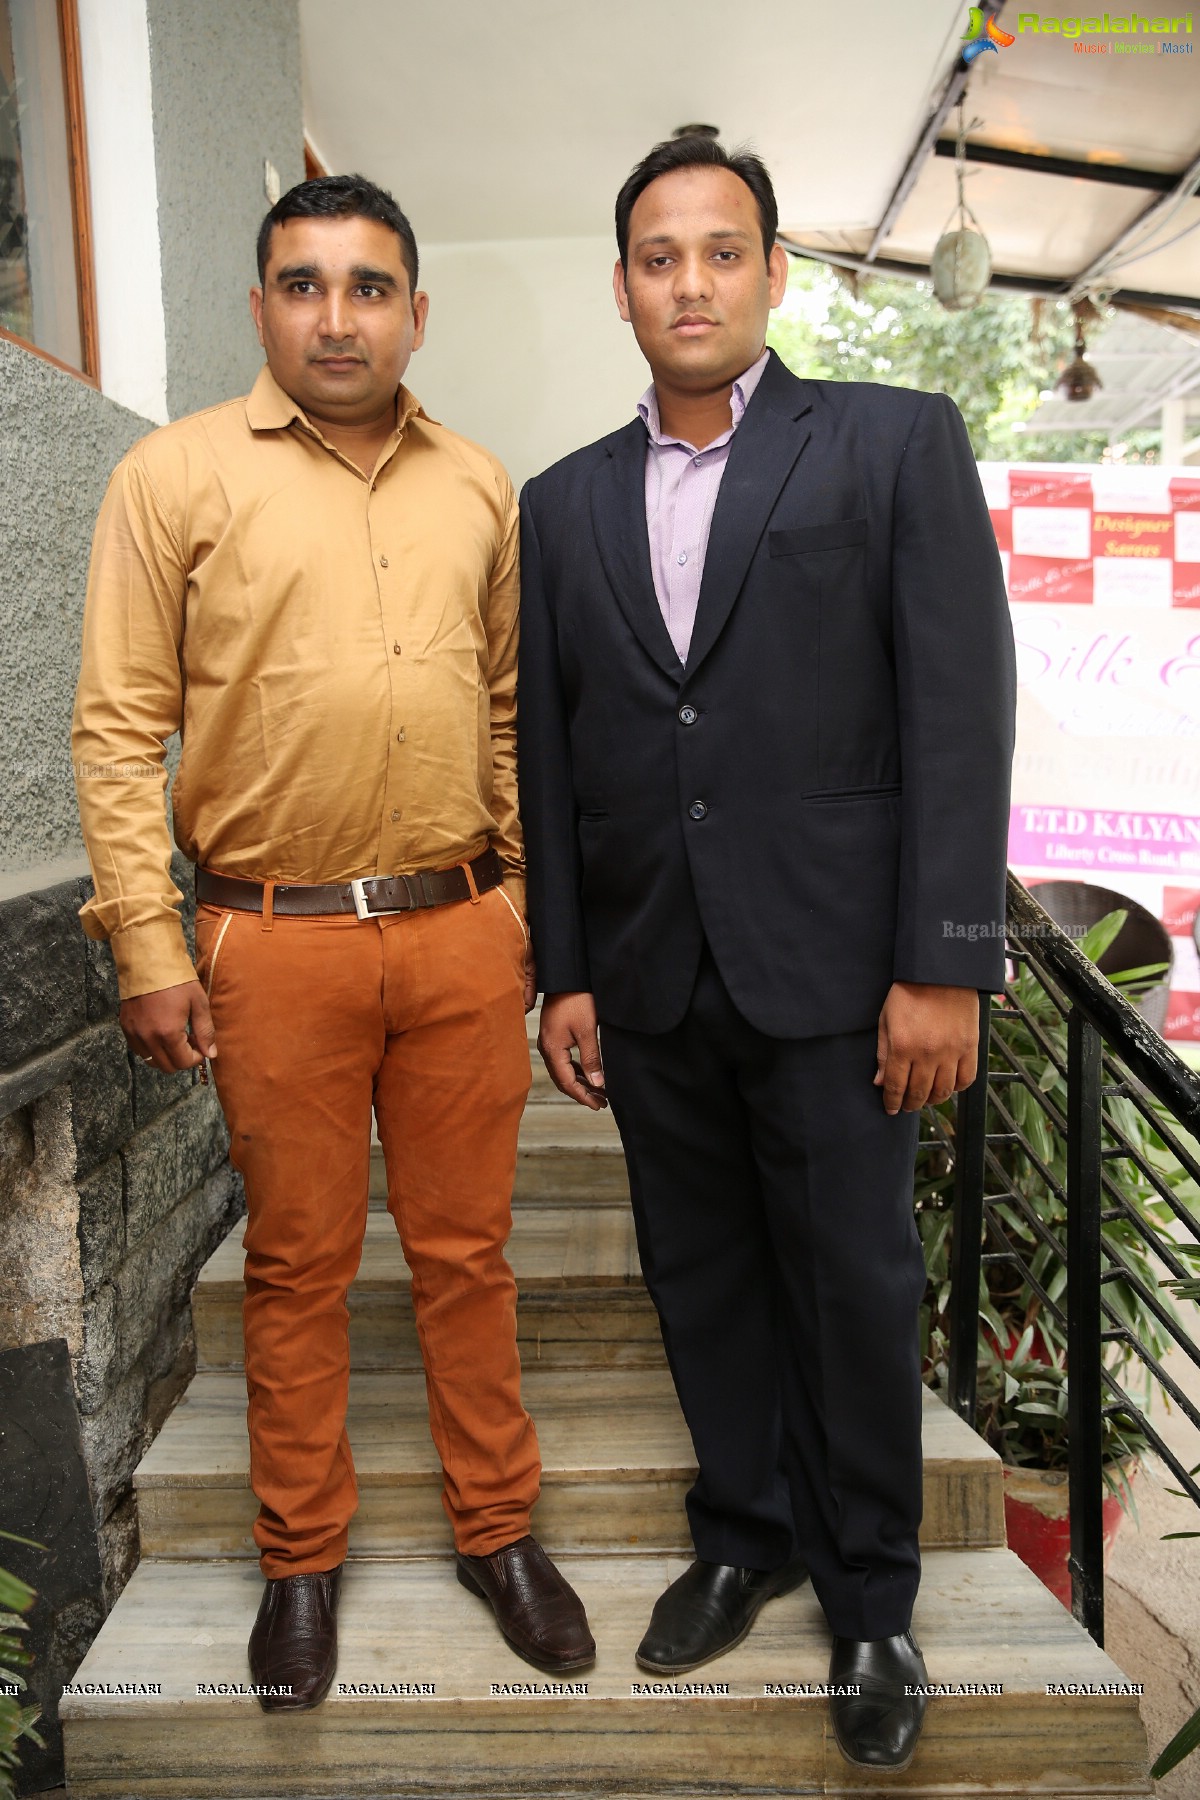 Silk and Cotton Expo Curtain Raiser at Cafe Hut-K, Jubilee Hills, Hyderabad